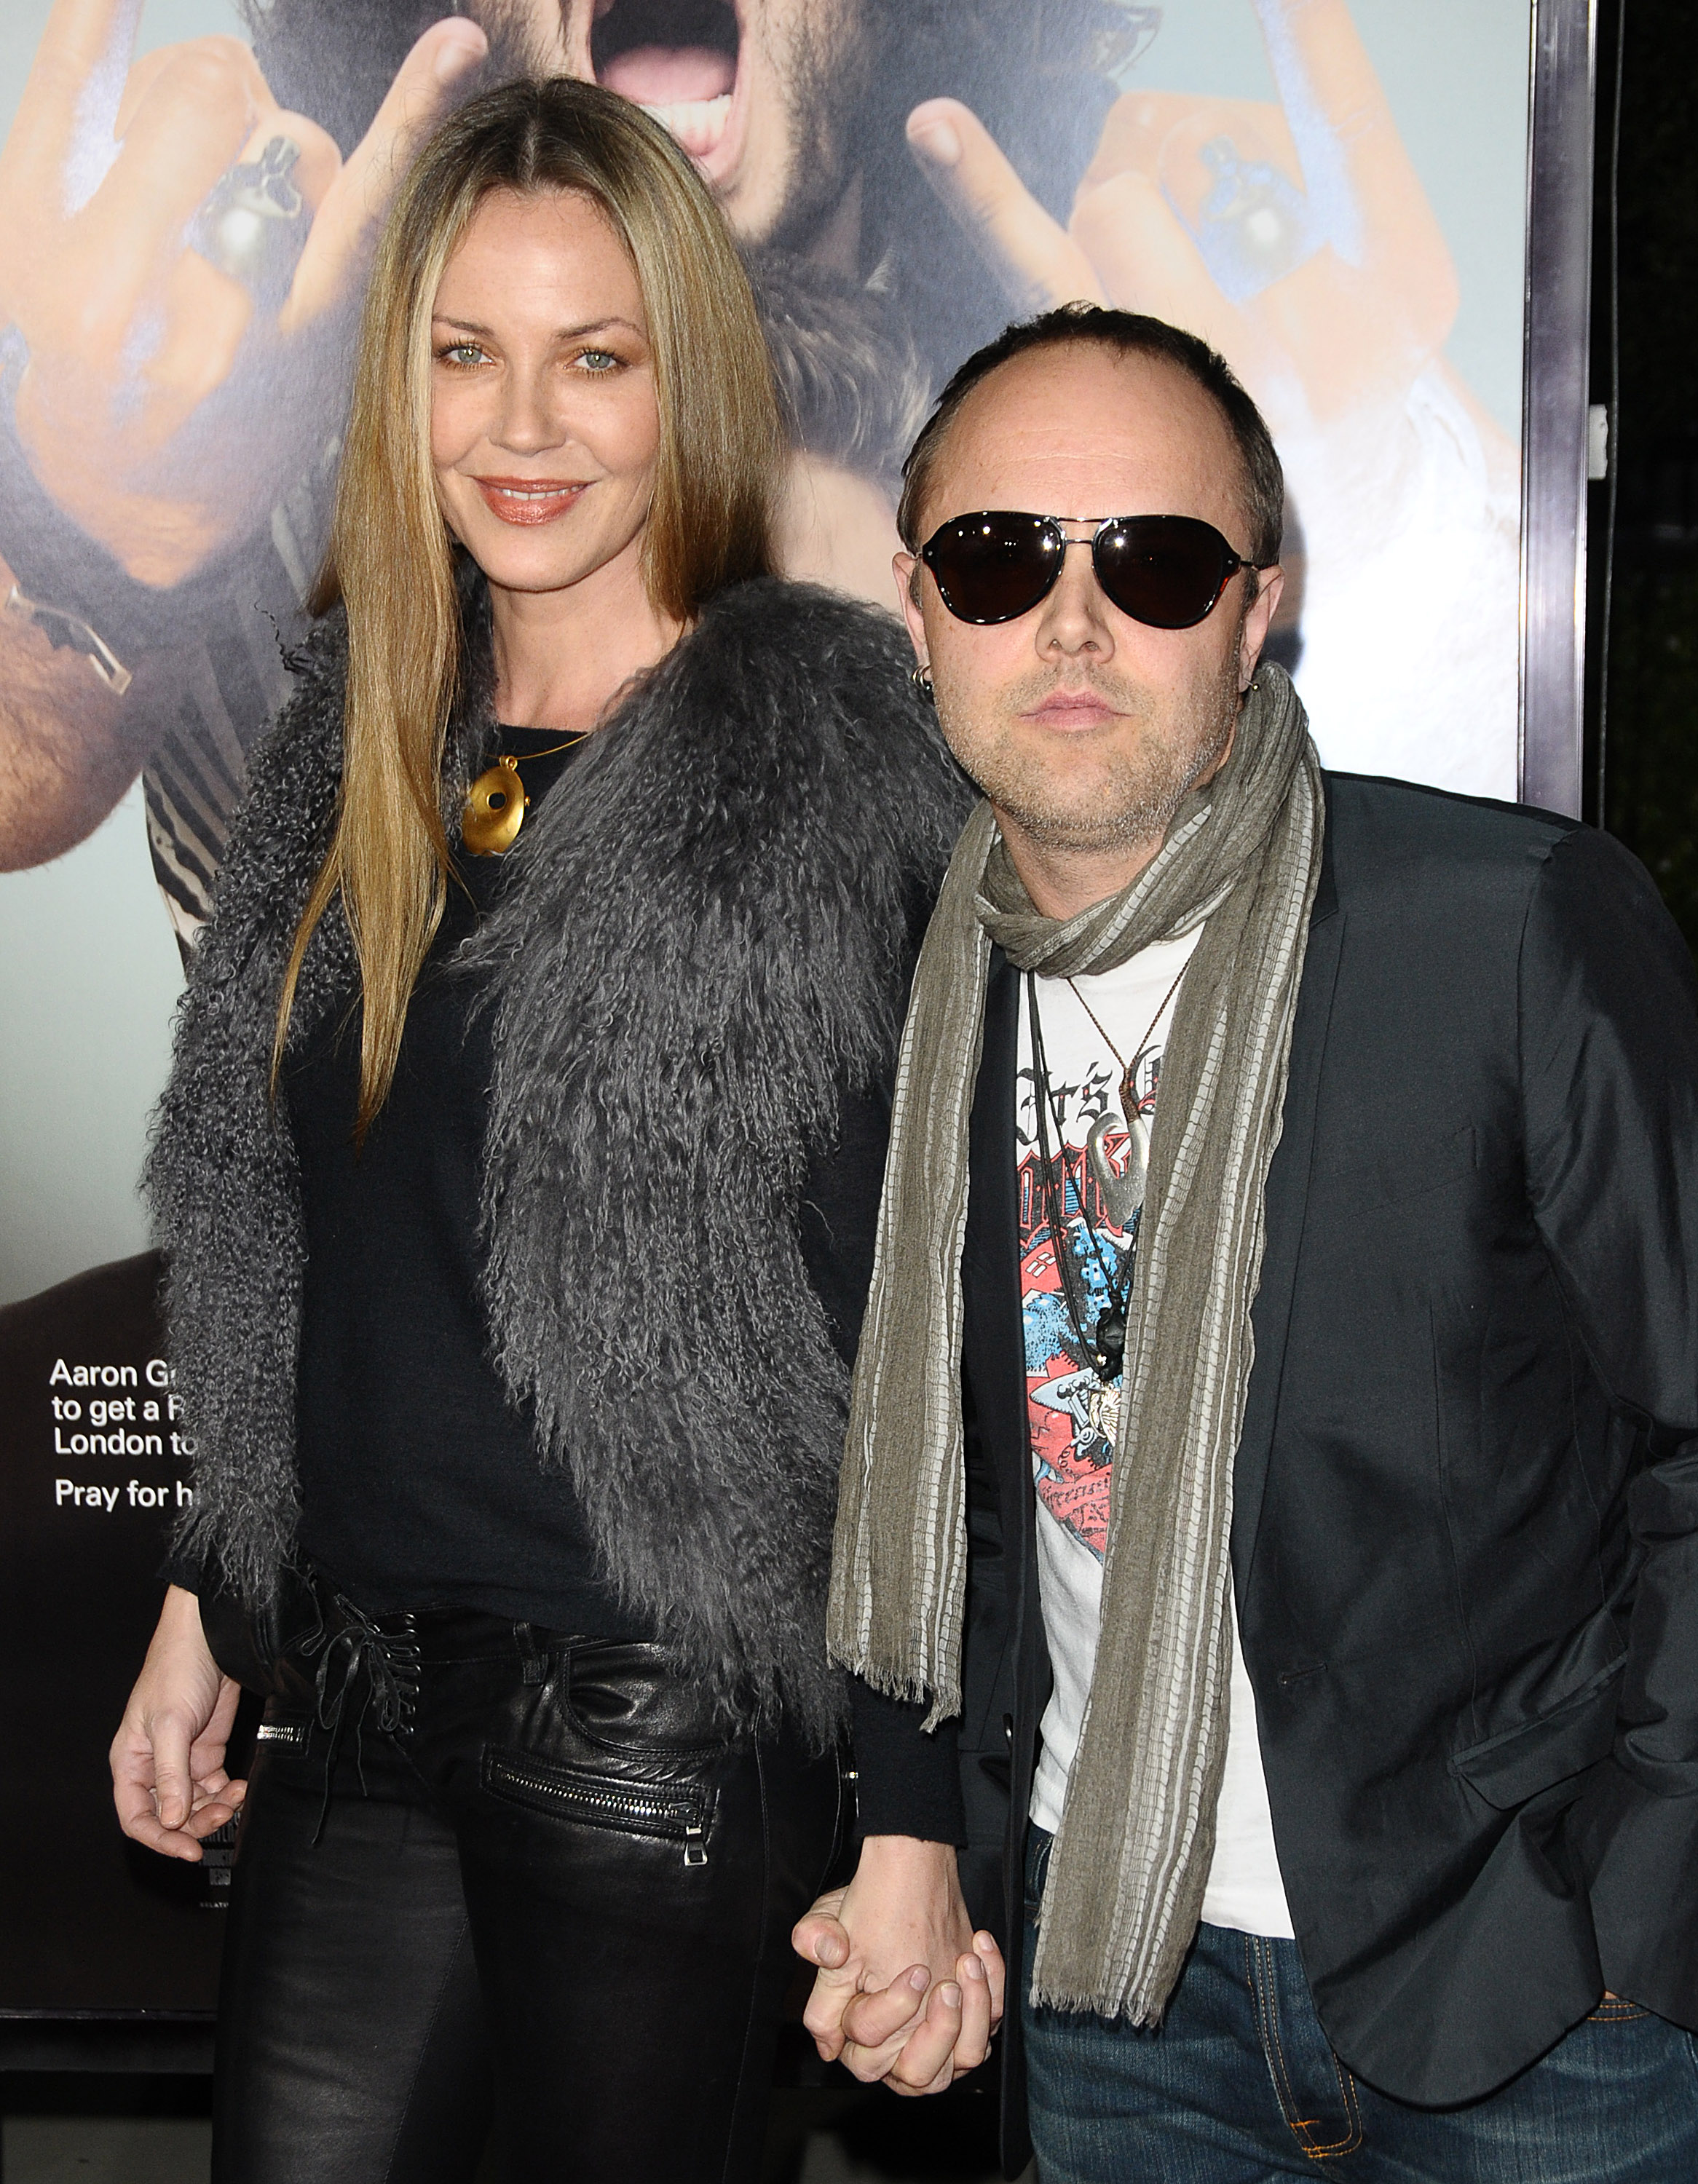 Connie Nielsen and Lars Ulrich at the premiere of "Get Him To The Greek" on May 25, 2010, in Los Angeles, California. | Source: Getty Images